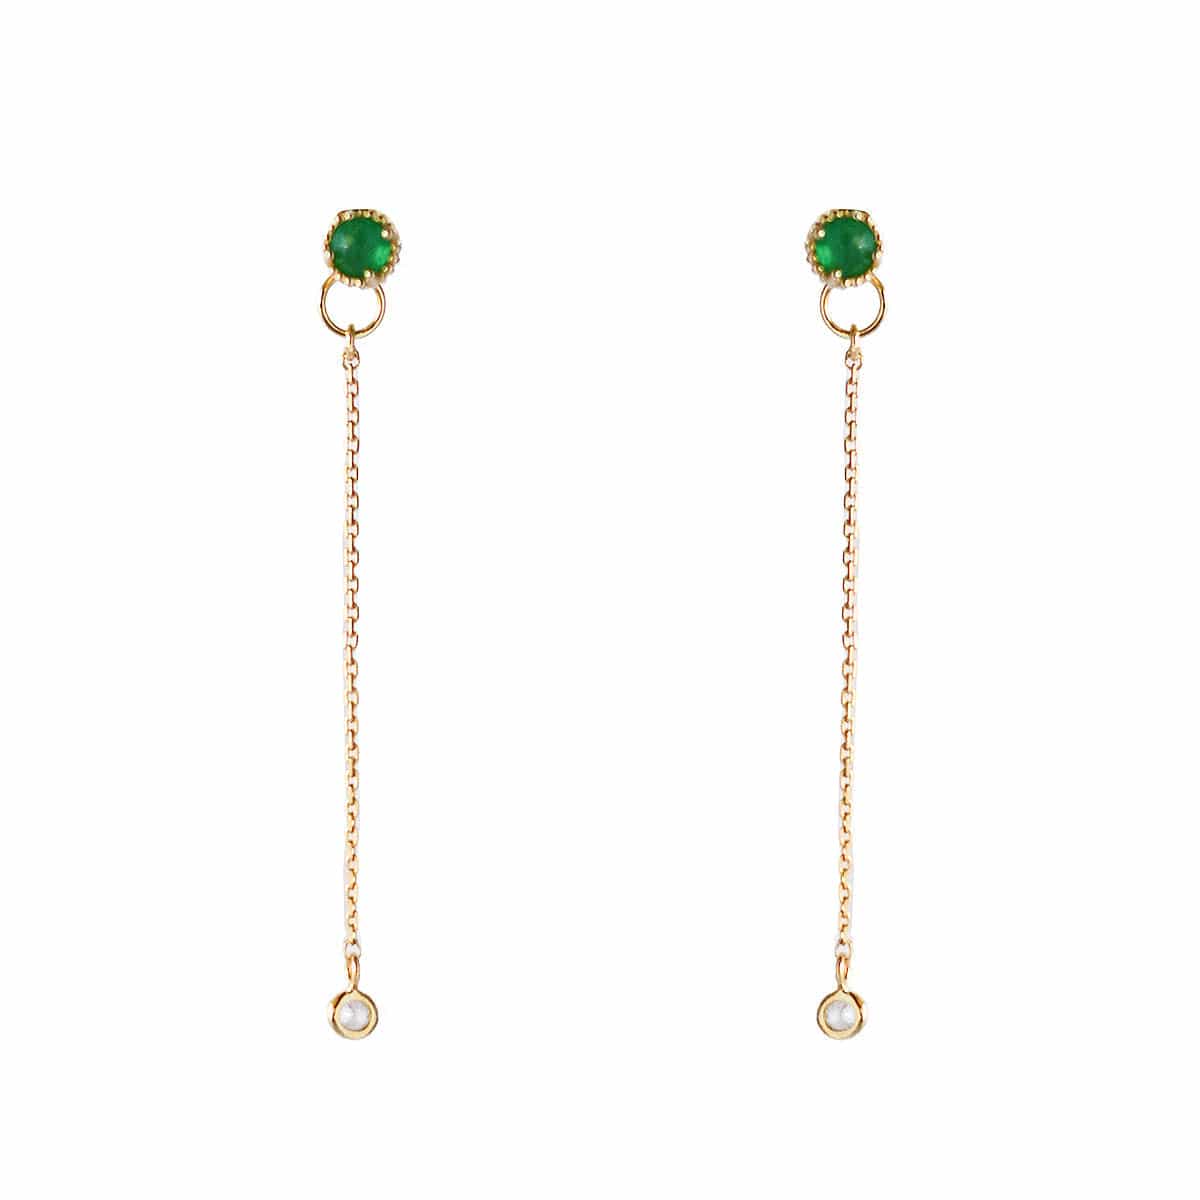 TAI JEWELRY Earrings GREEN Glass Post With Chain Backing